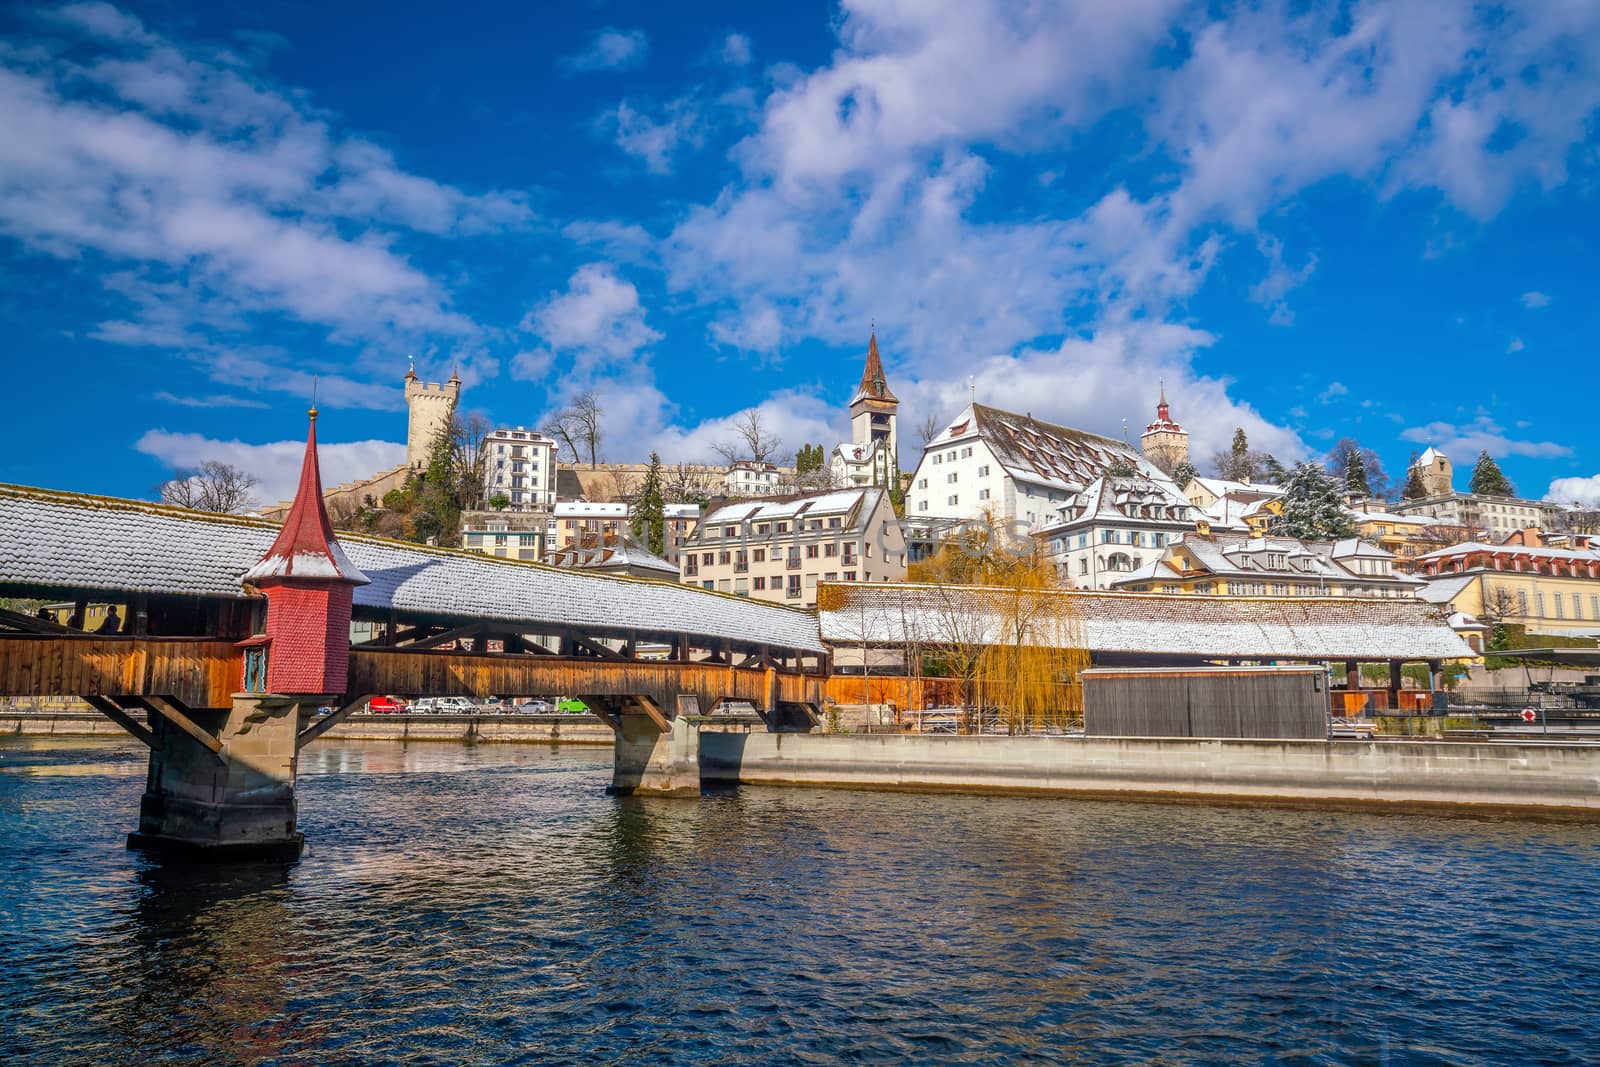 Historic city center of downtown Lucerne with  Chapel Bridge and lake Lucerne in Switzerland